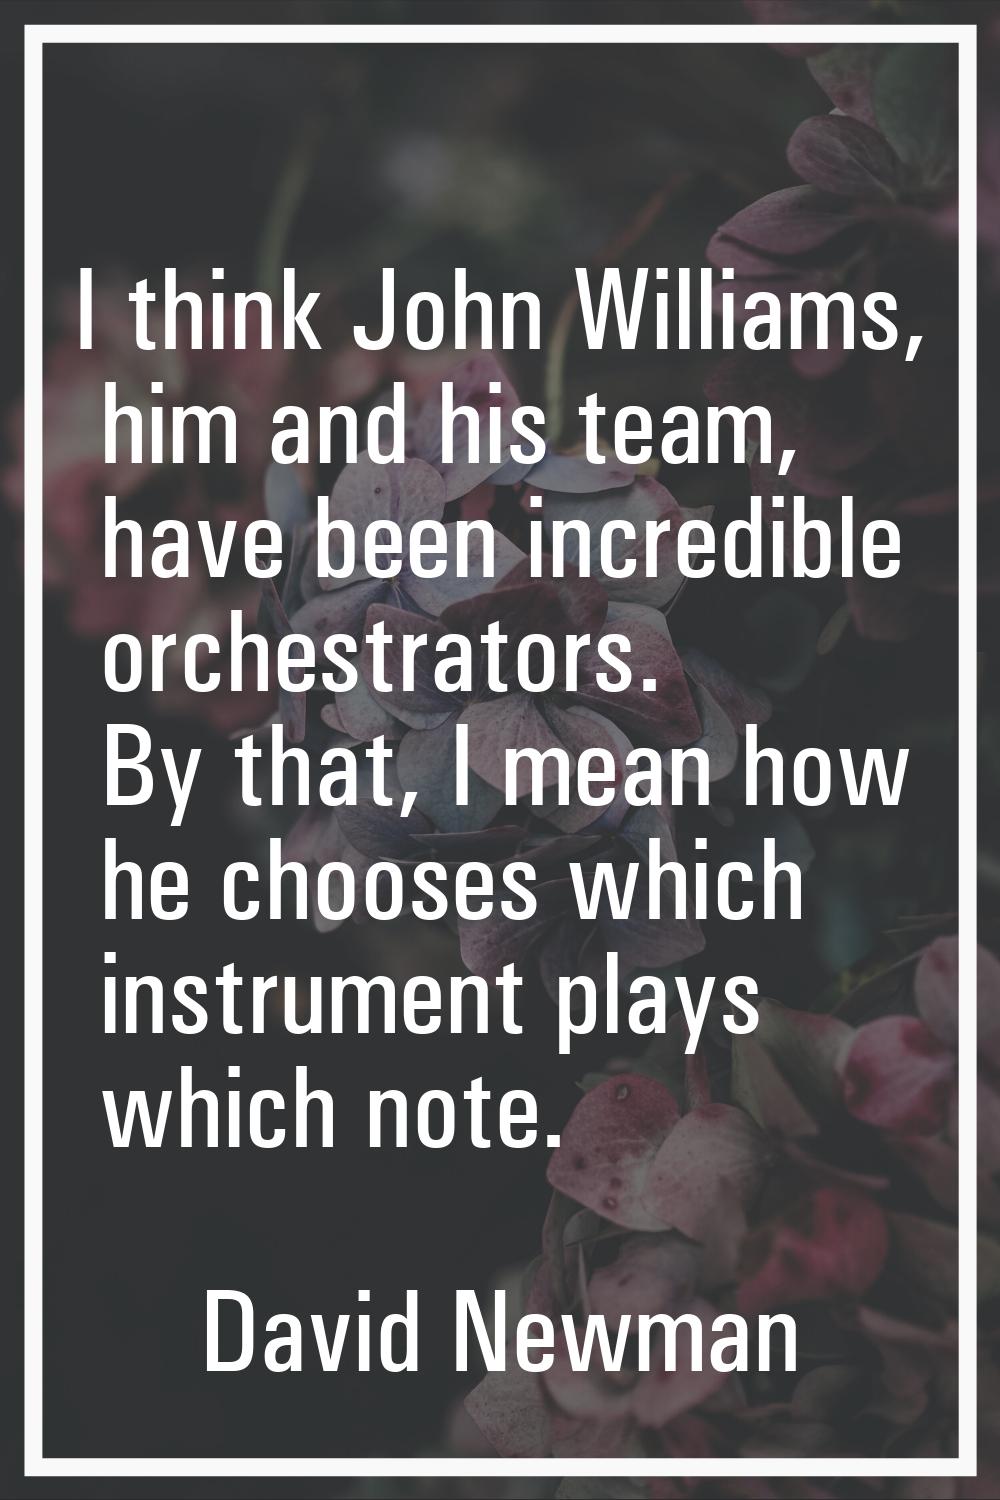 I think John Williams, him and his team, have been incredible orchestrators. By that, I mean how he